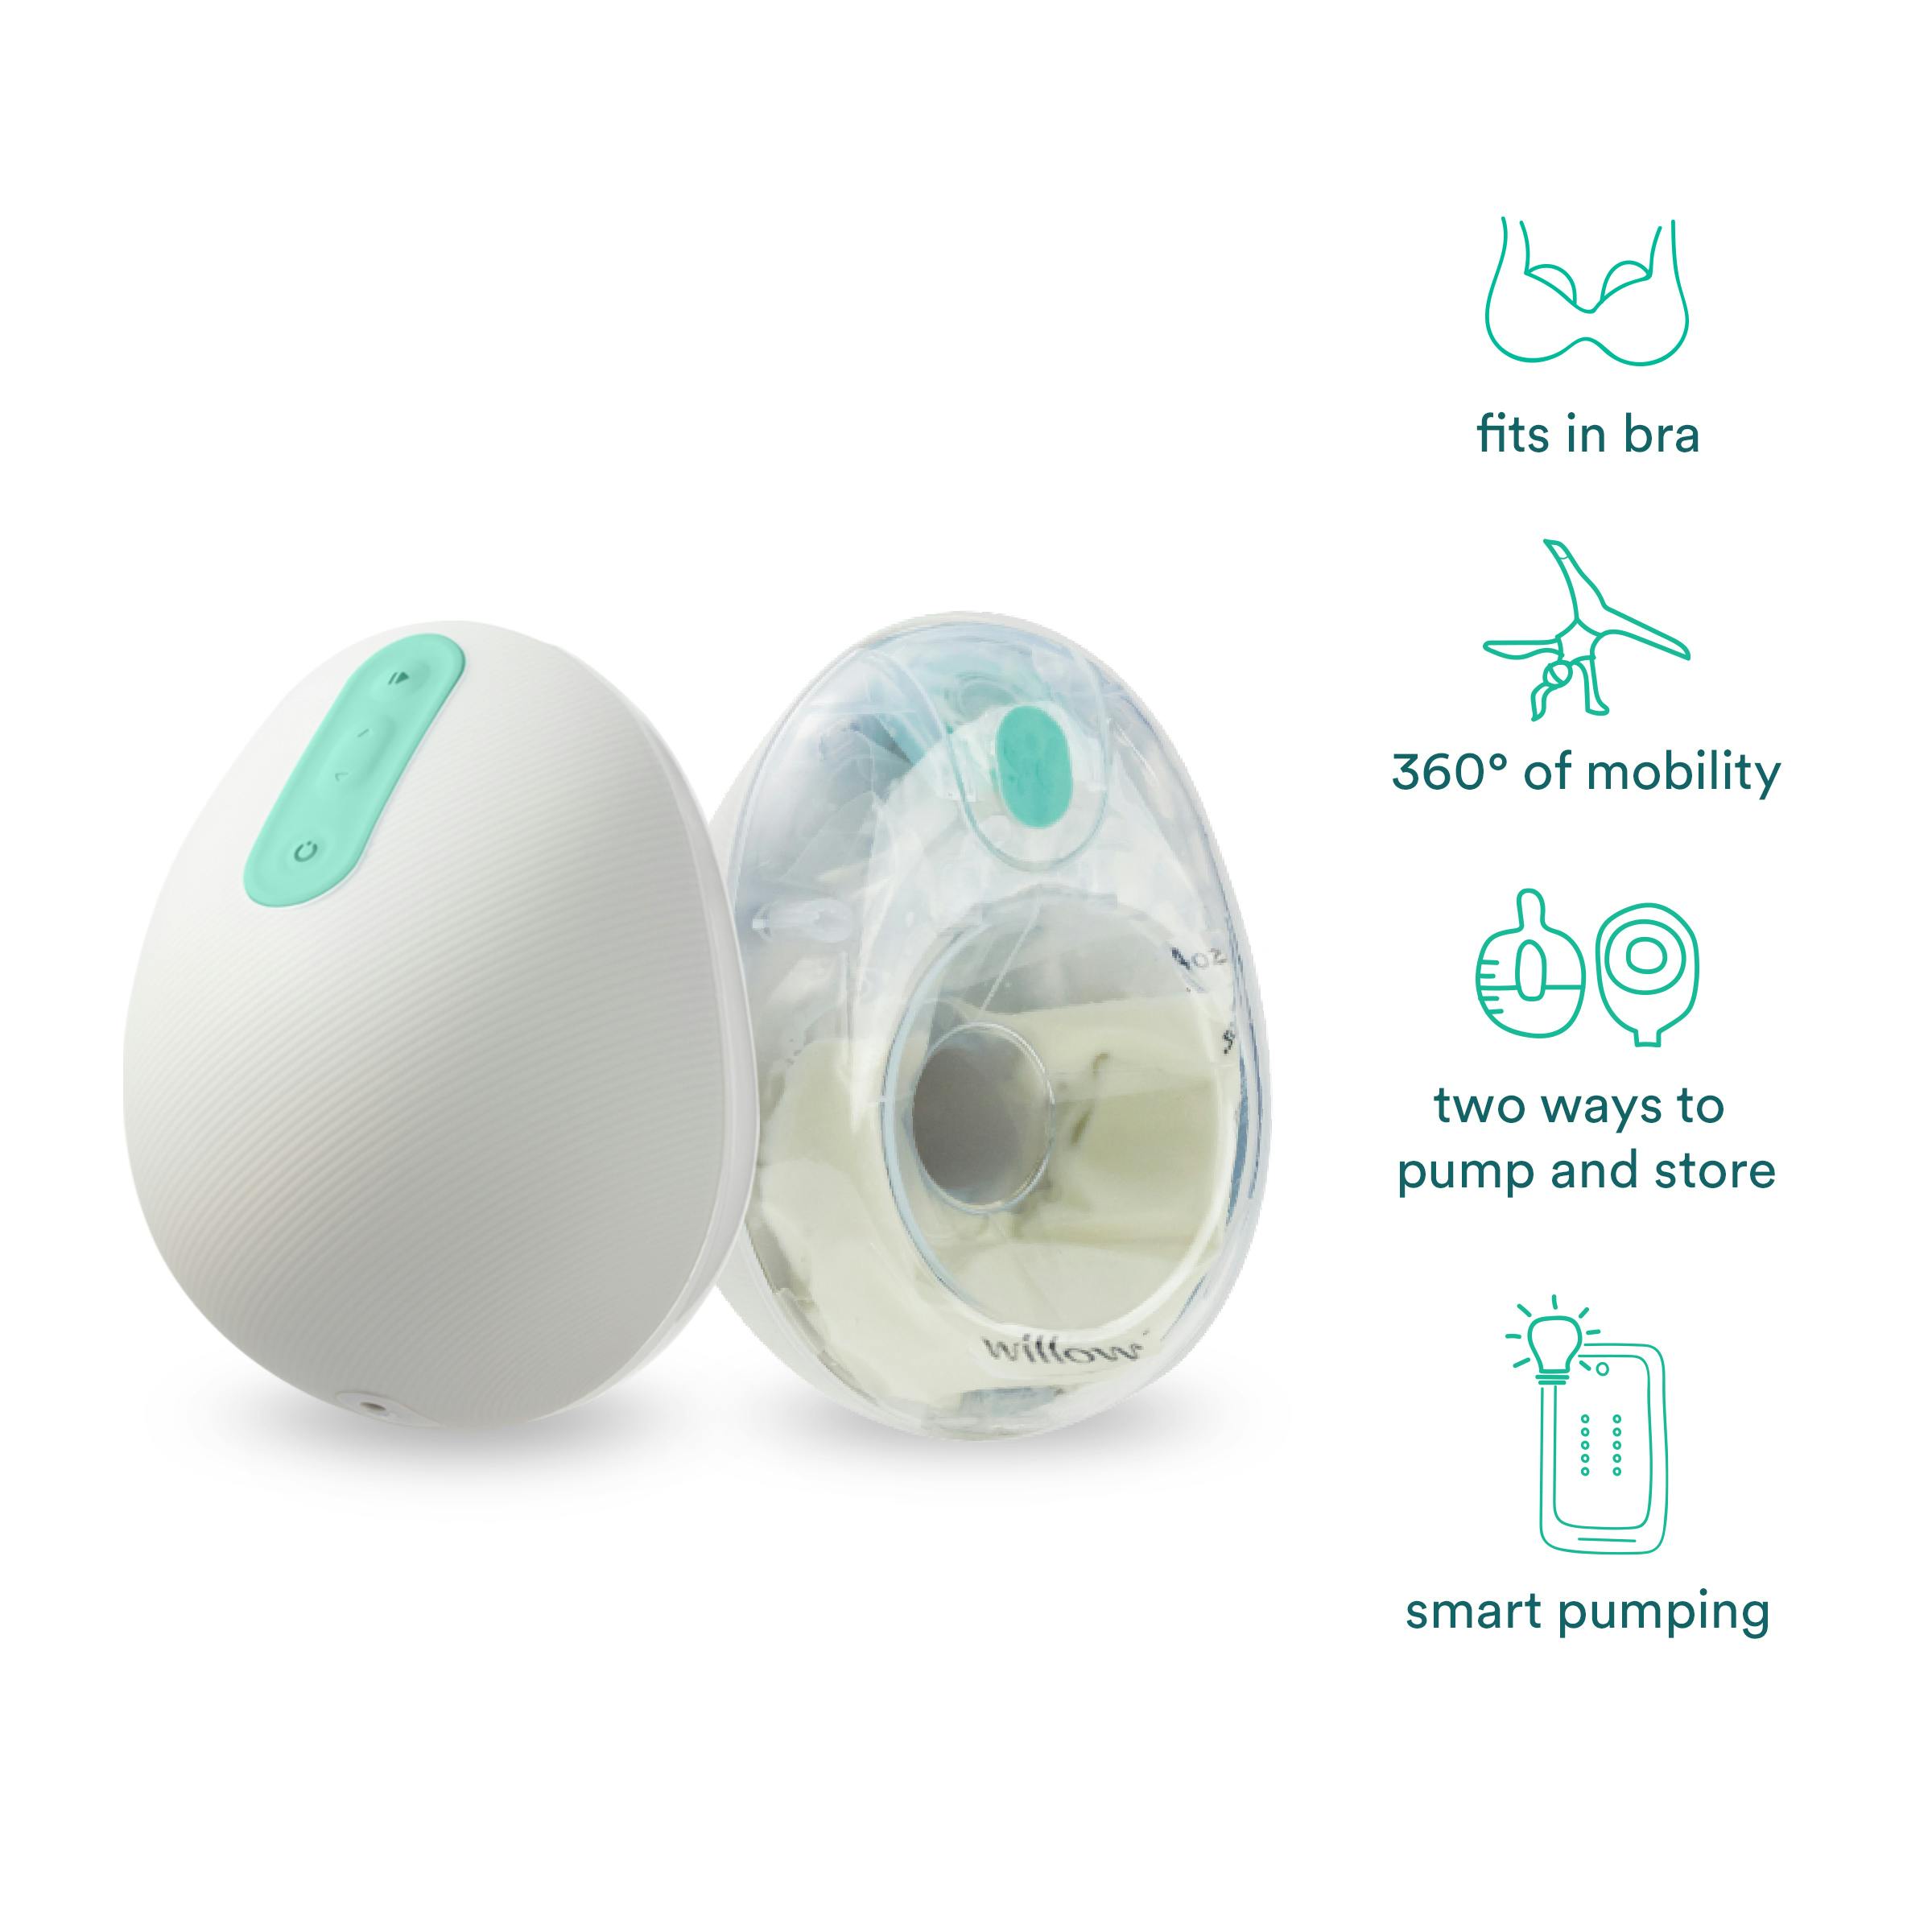 How The Willow Breast Pump Is Changing Women's Lives